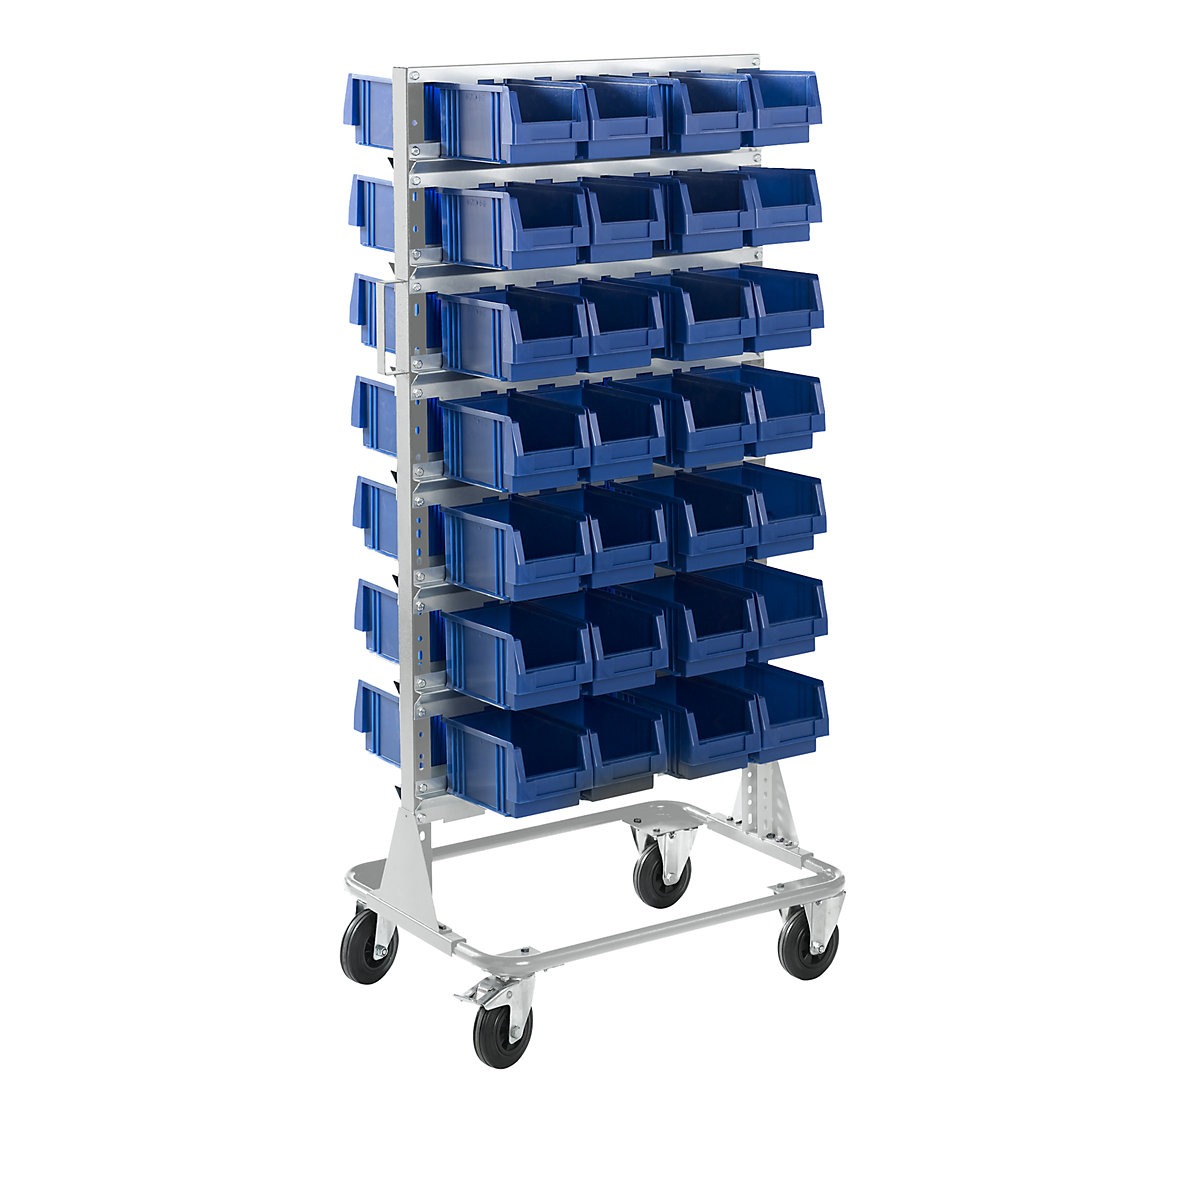 Mobile rack, height 1588 mm, mobile rack with 56 open fronted storage bins, light grey-6